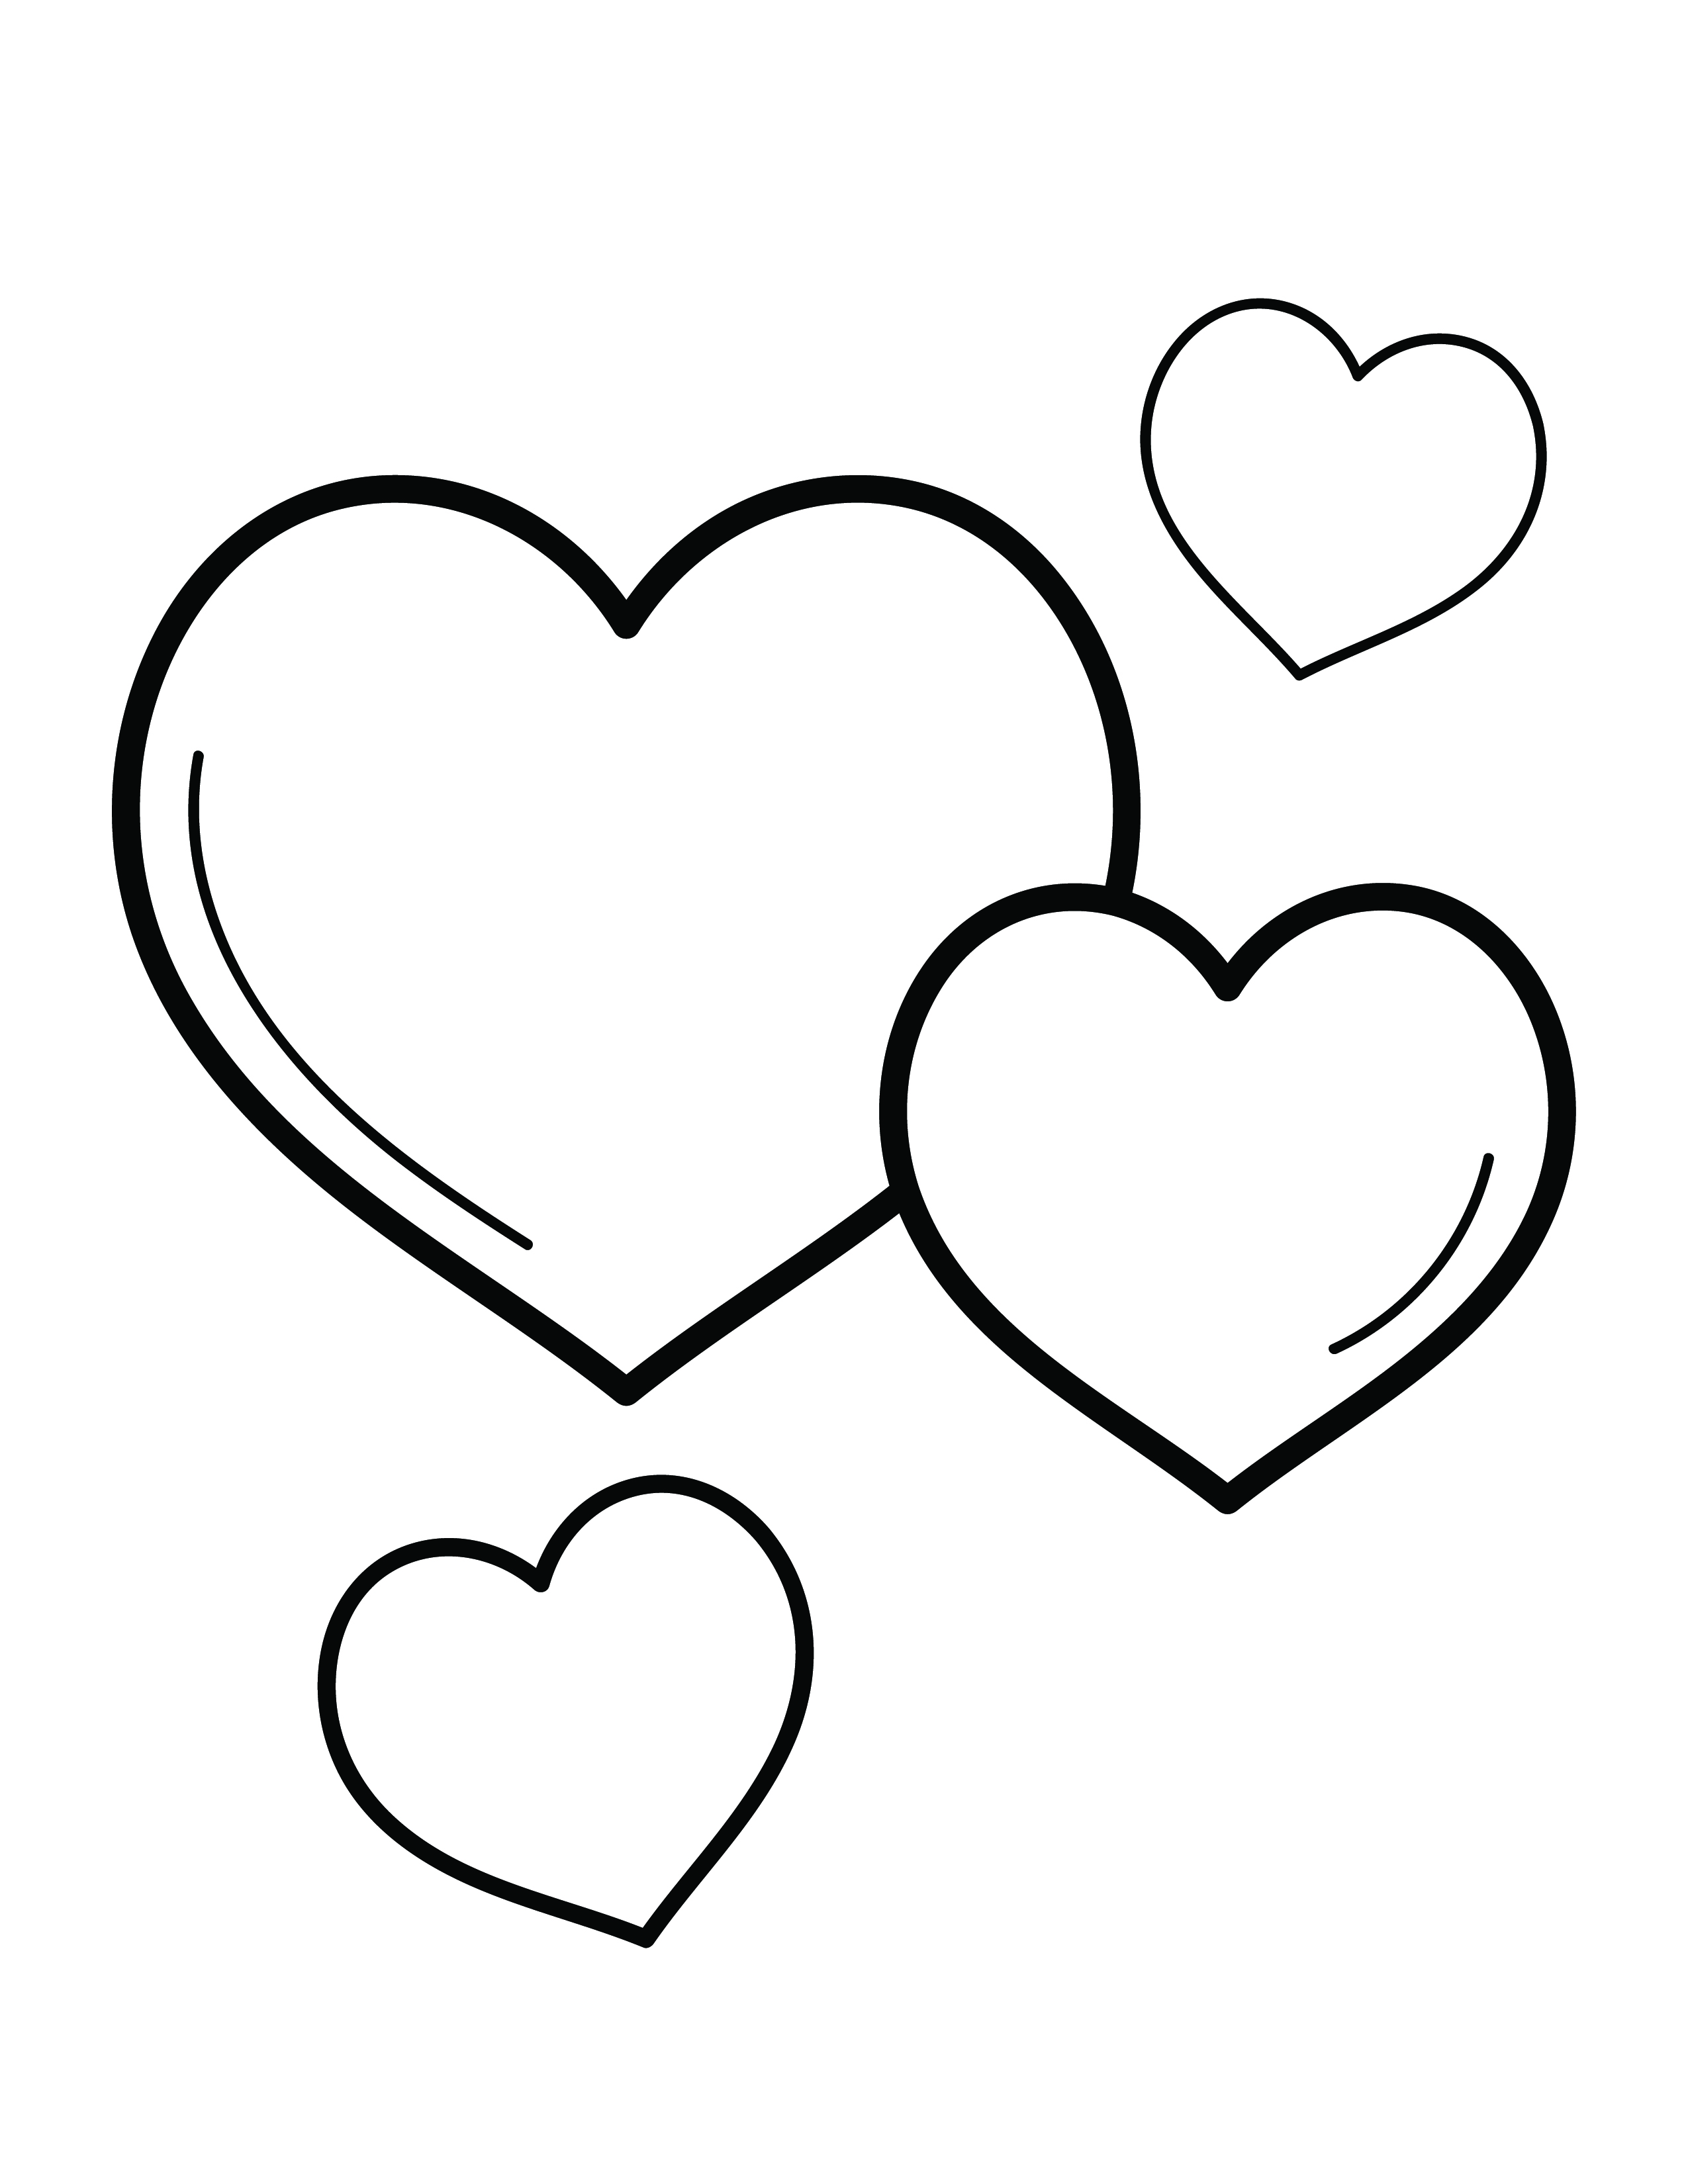 FREE Human Heart Coloring Page in EPS, Illustrator, JPG, PNG, PDF, SVG